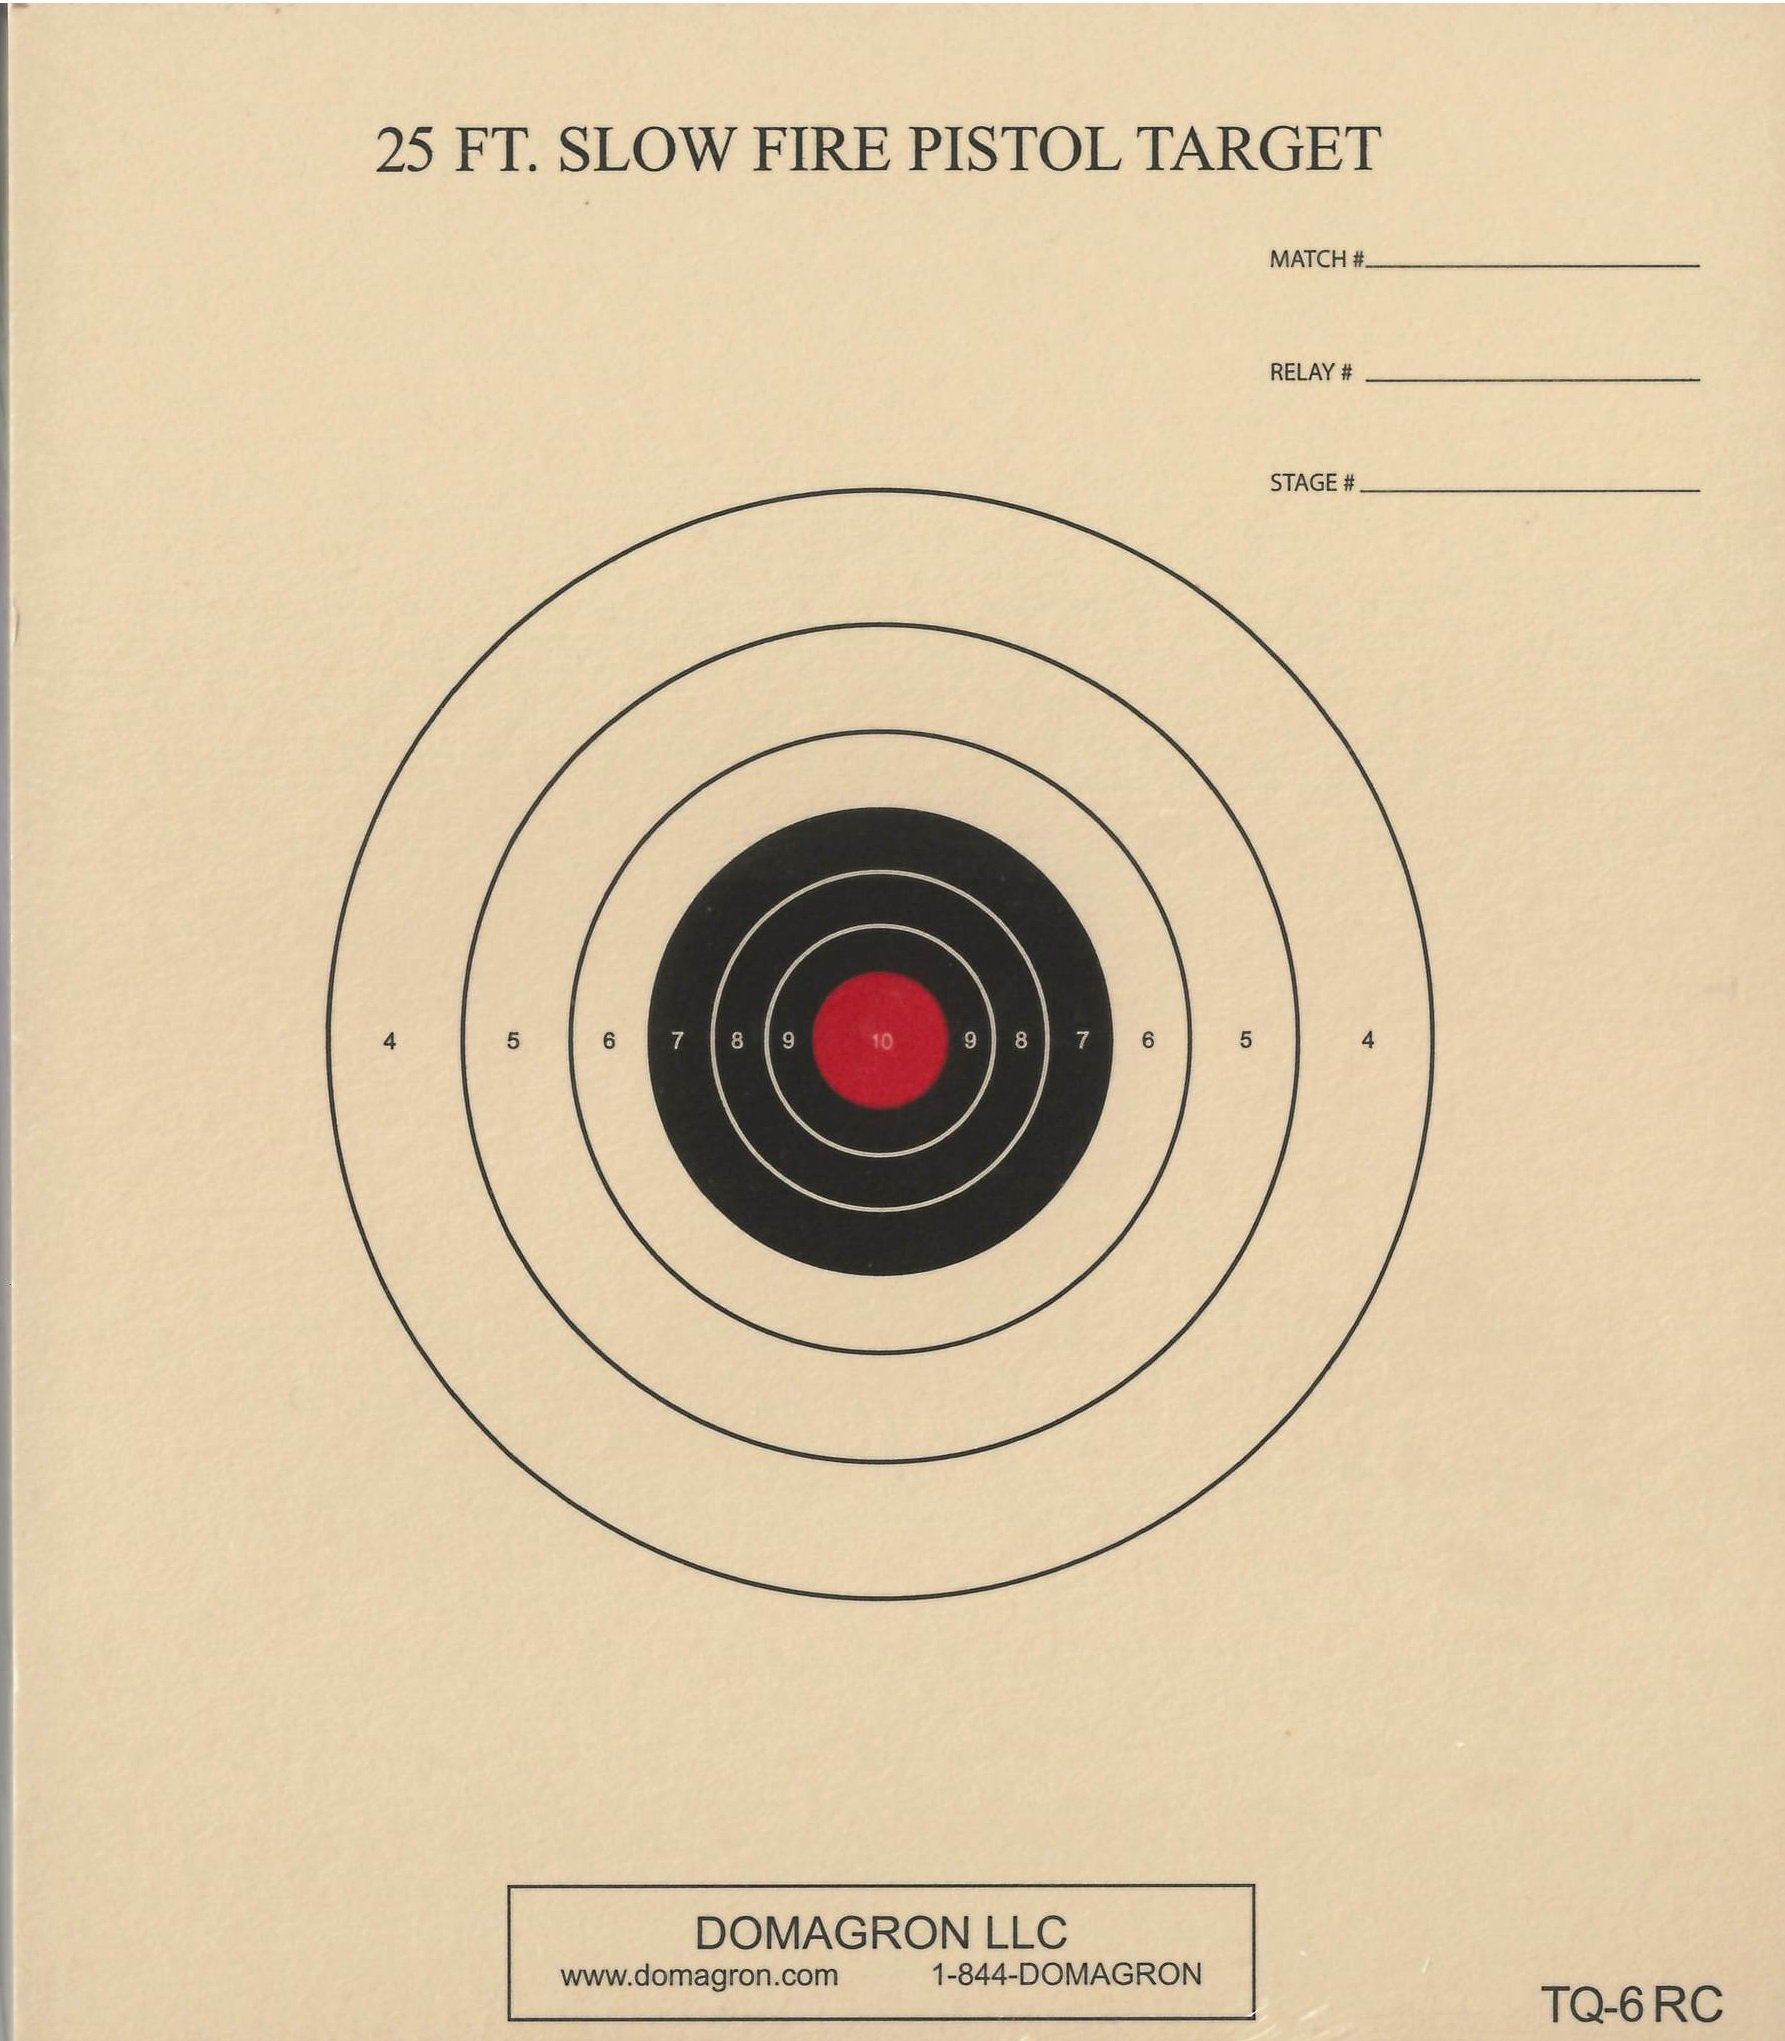 NRA TQ-6 Official 25 Foot Slow Fire Pistol Target 100 targets on heavy paper 